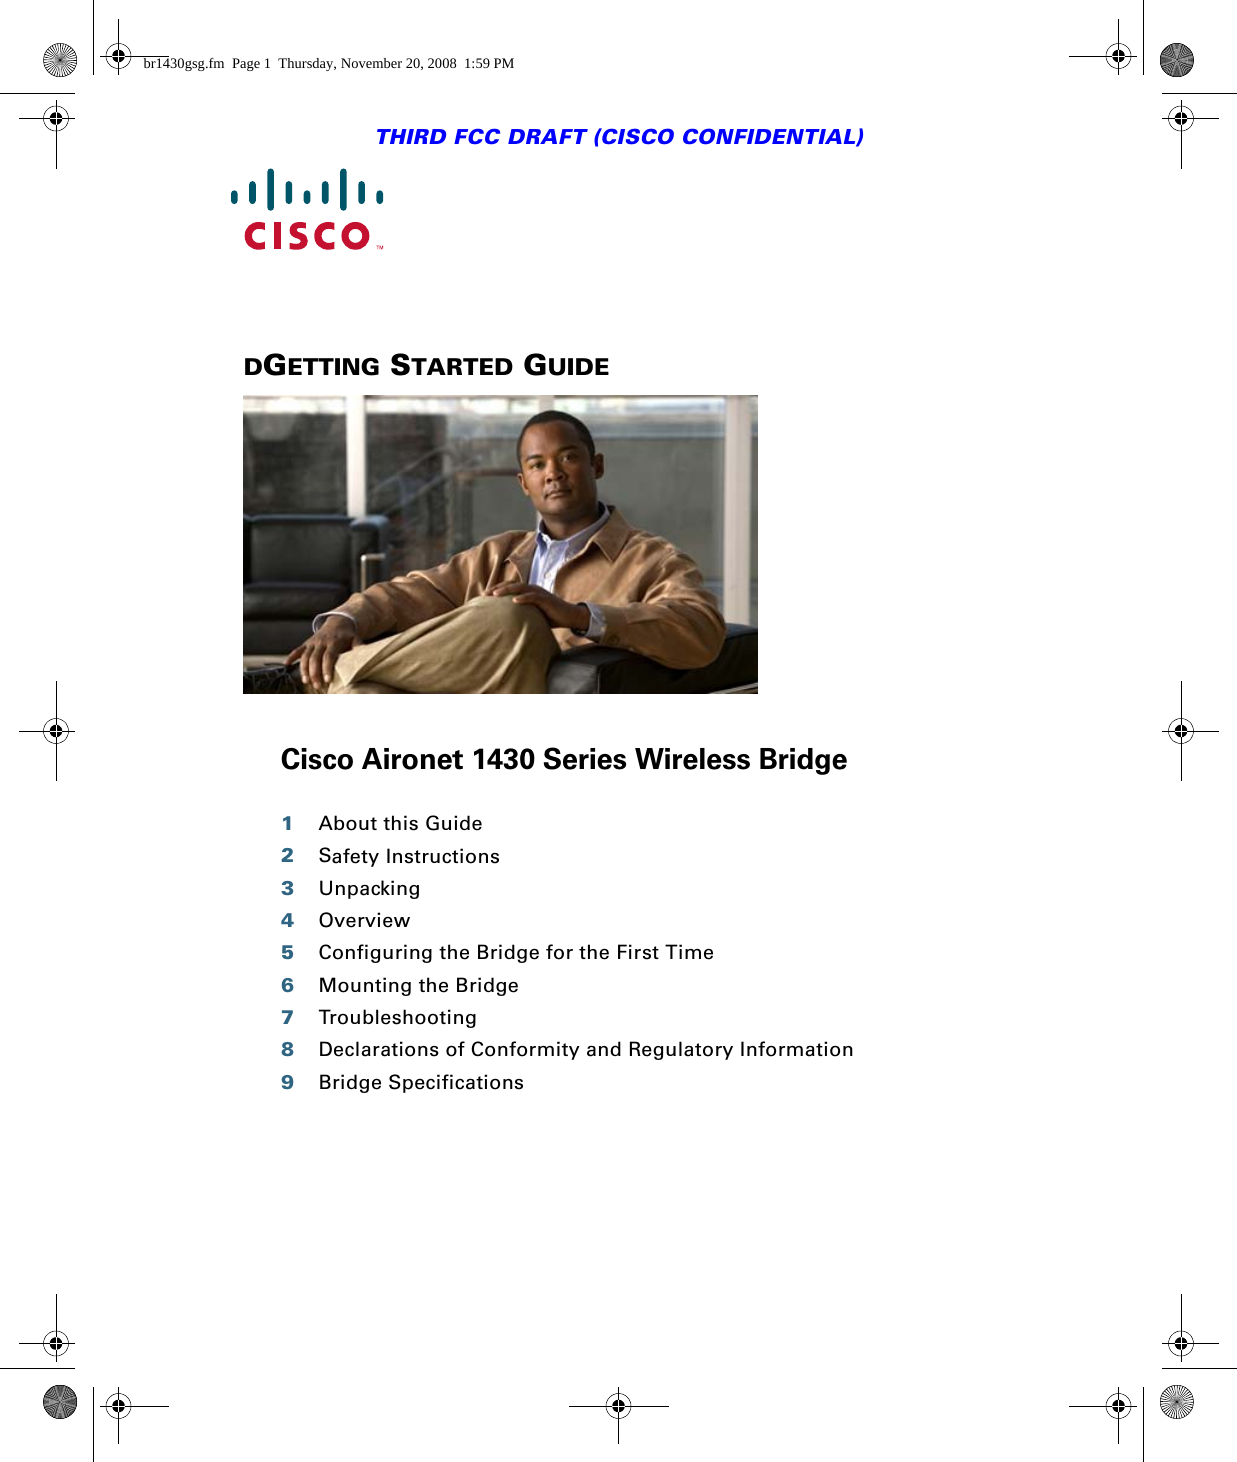 THIRD FCC DRAFT (CISCO CONFIDENTIAL)DGETTING STARTED GUIDE Cisco Aironet 1430 Series Wireless Bridge1About this Guide2Safety Instructions3Unpacking4Overview5Configuring the Bridge for the First Time6Mounting the Bridge7Troubleshooting8Declarations of Conformity and Regulatory Information9Bridge Specificationsbr1430gsg.fm  Page 1  Thursday, November 20, 2008  1:59 PM